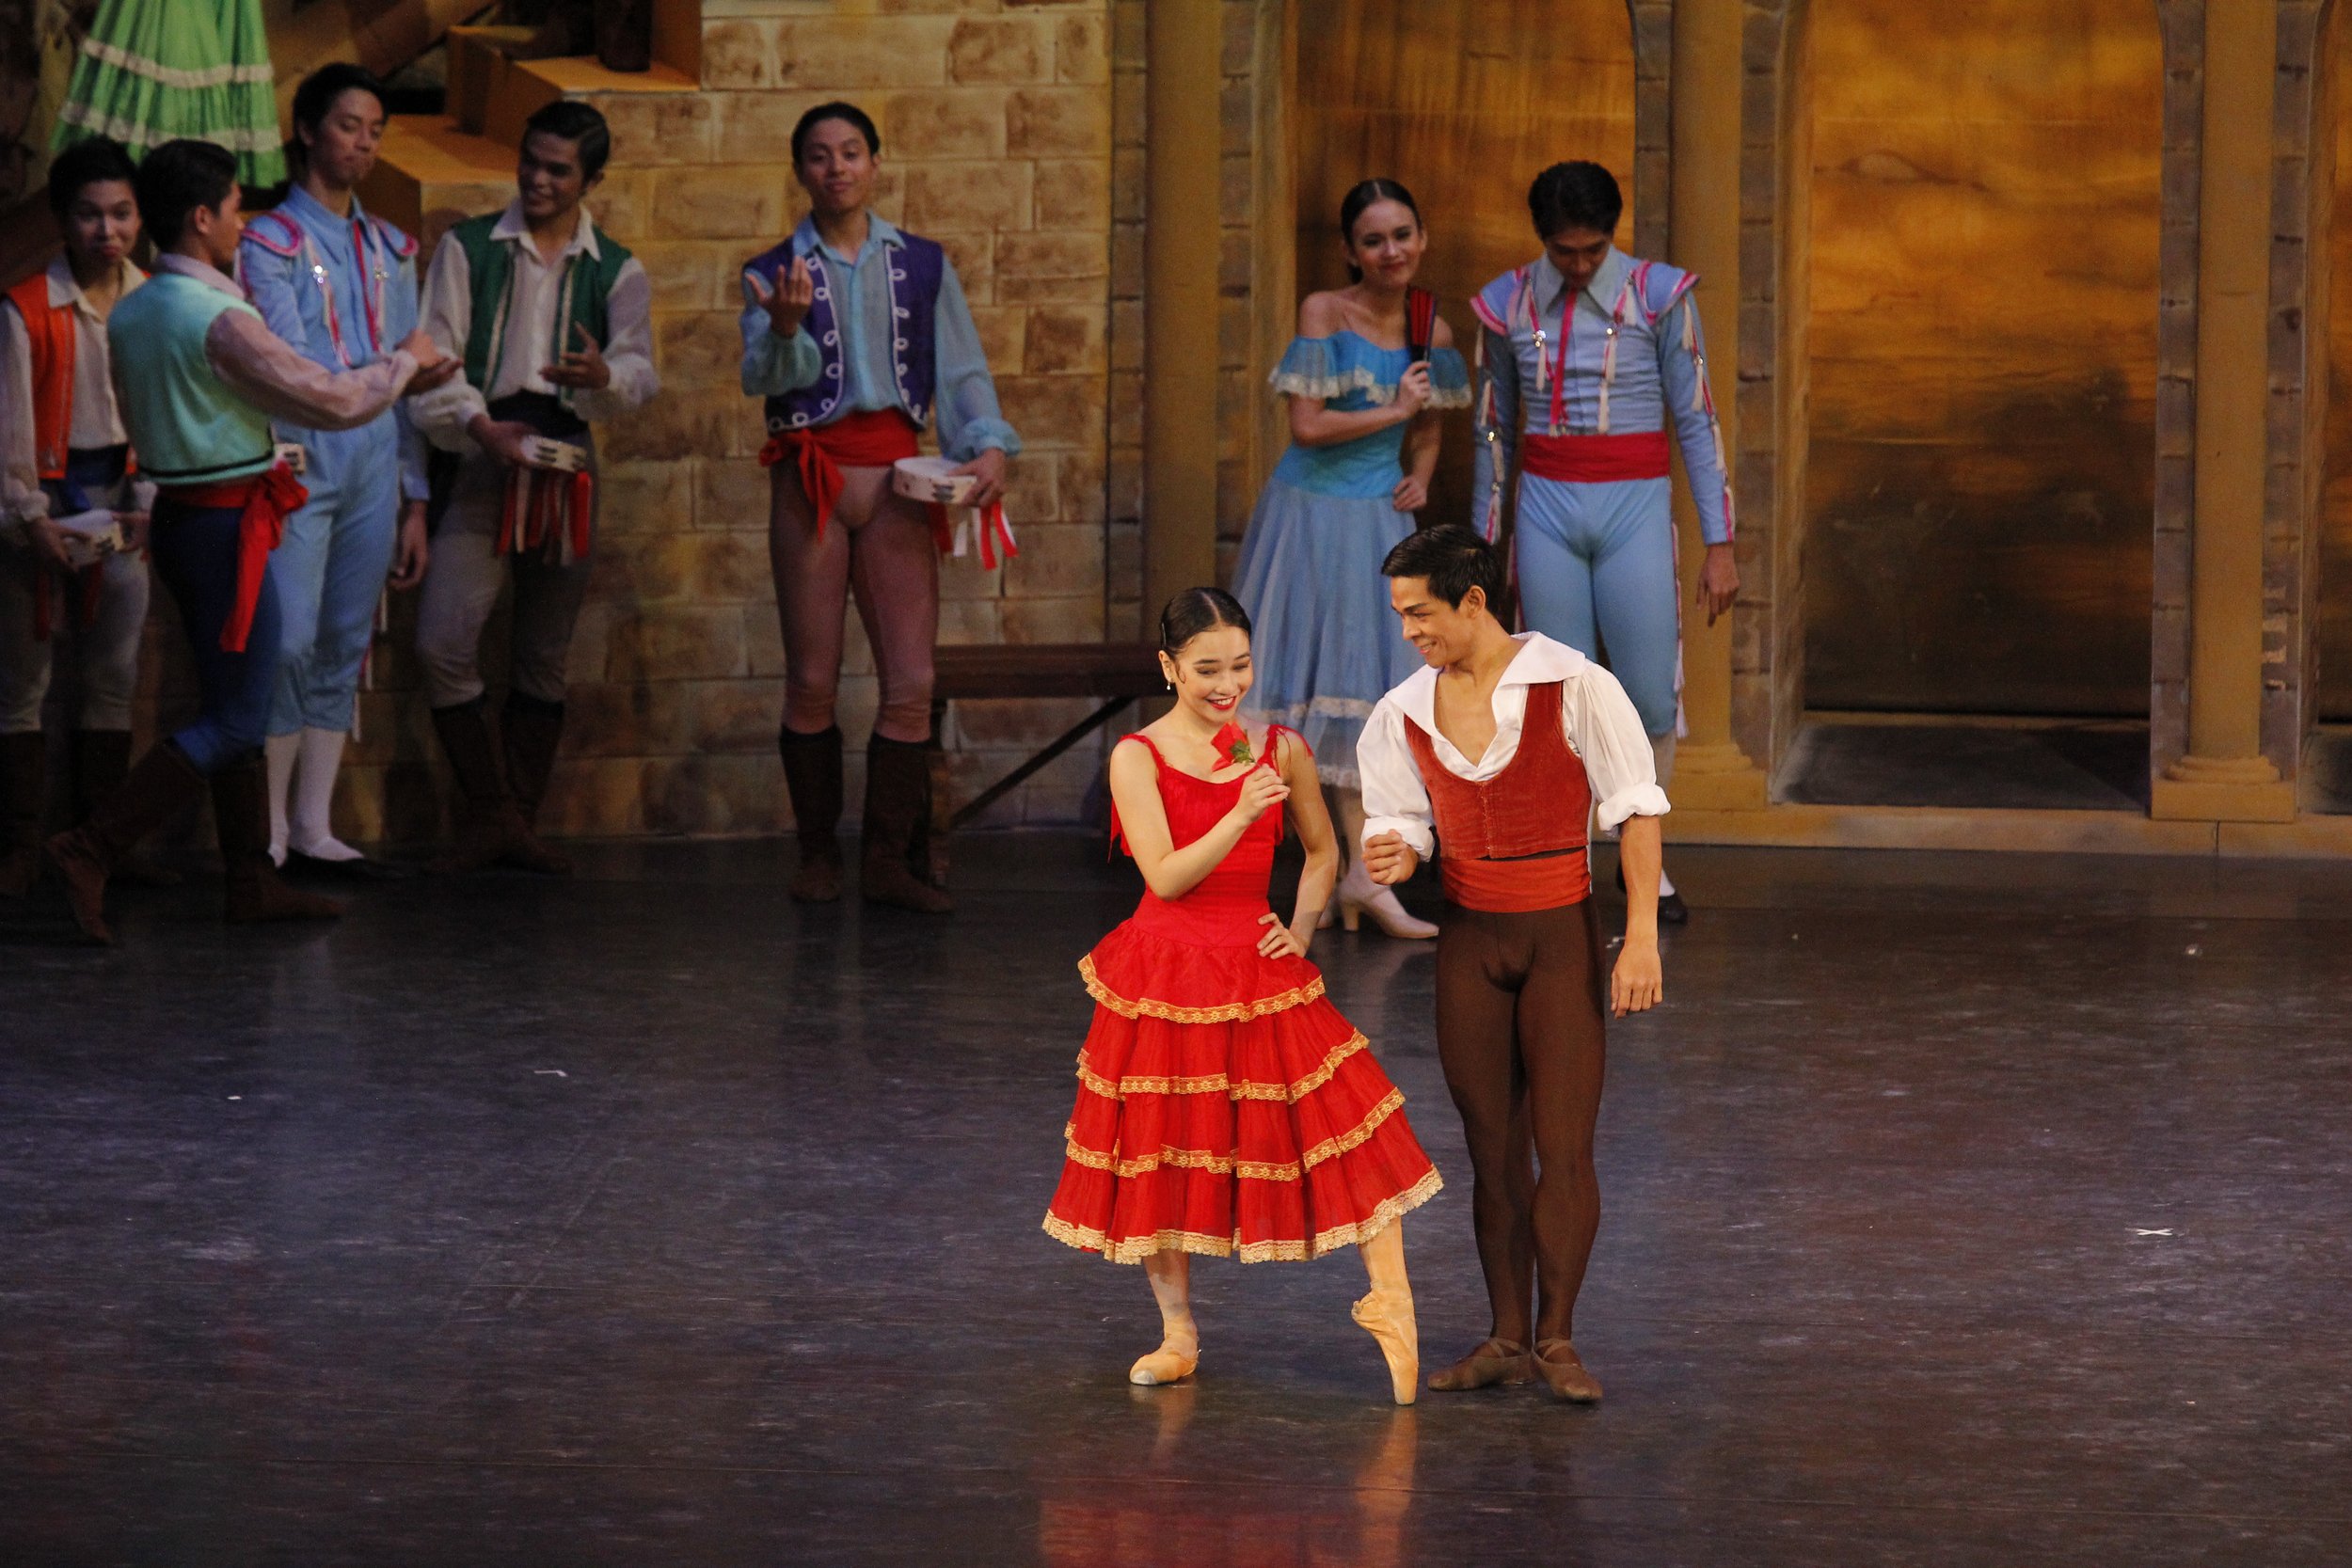    Stealing some time with each other, Basilio (Gerardo Francisco Jr.) takes the opportunity to give Kitri (Jasmine Pia Dames) a rose as a token of his love for her even as her father Lorenzo disapproves of their relationship. Basilio and Kitri make 